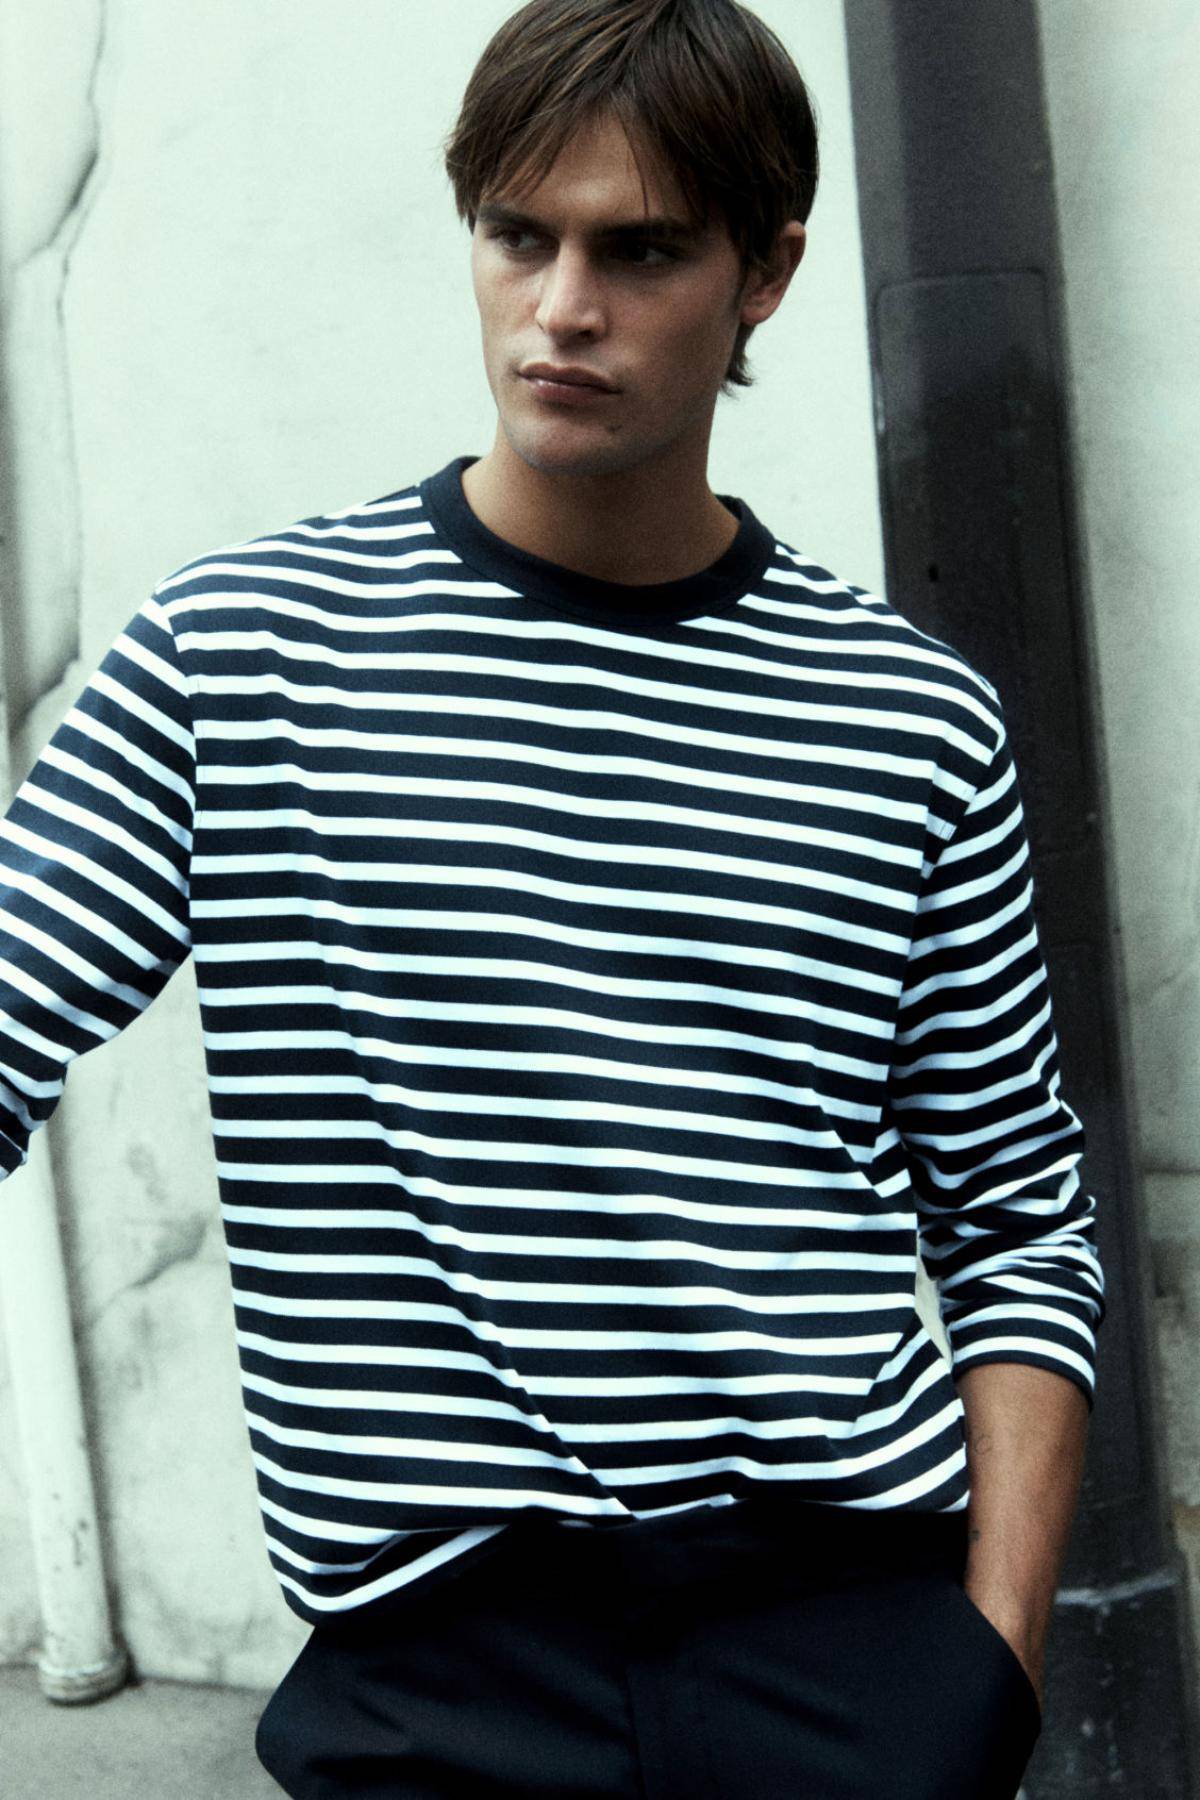 Clothing: COS NAVY-WHITE RELAXED-FIT LONG-SLEEVE T-SHIRT / COS NAVY RELAXED-FIT TAPERED CHINOS / Model: Parker Van Noord. Photographer: Robin Galiegue. Stylist: Virginie Benarroch. Hair Stylist: Michal Bielecki. Makeup Artist: Mayumi Oda. Art Director: Andy Knappett